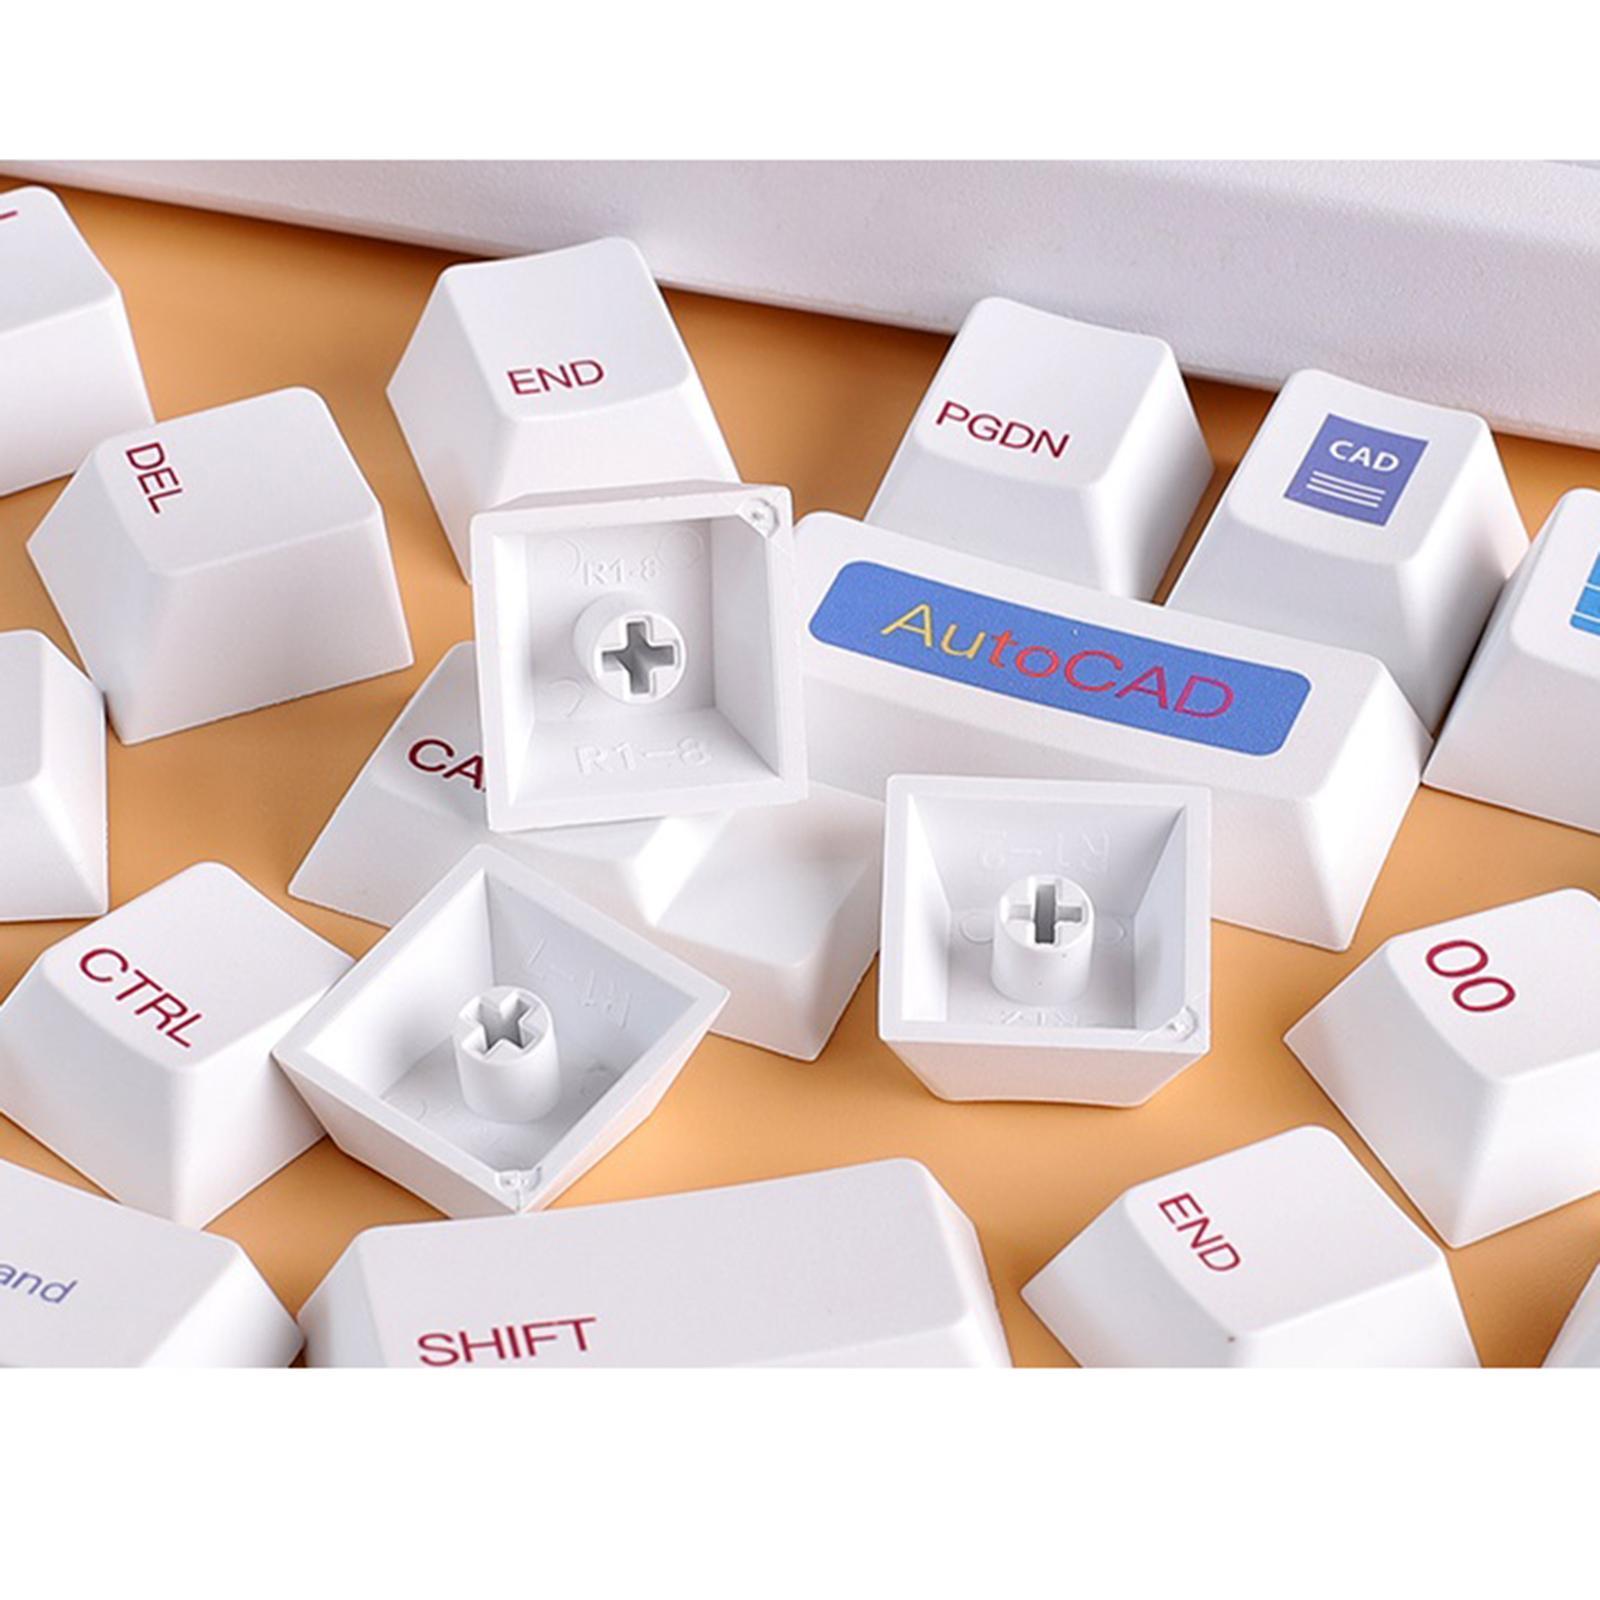 Keycaps, 136 Keys, Easy Install ,Comfortable for CHERRY MX Switch Mechanical Keyboard Keyboard Ccessories